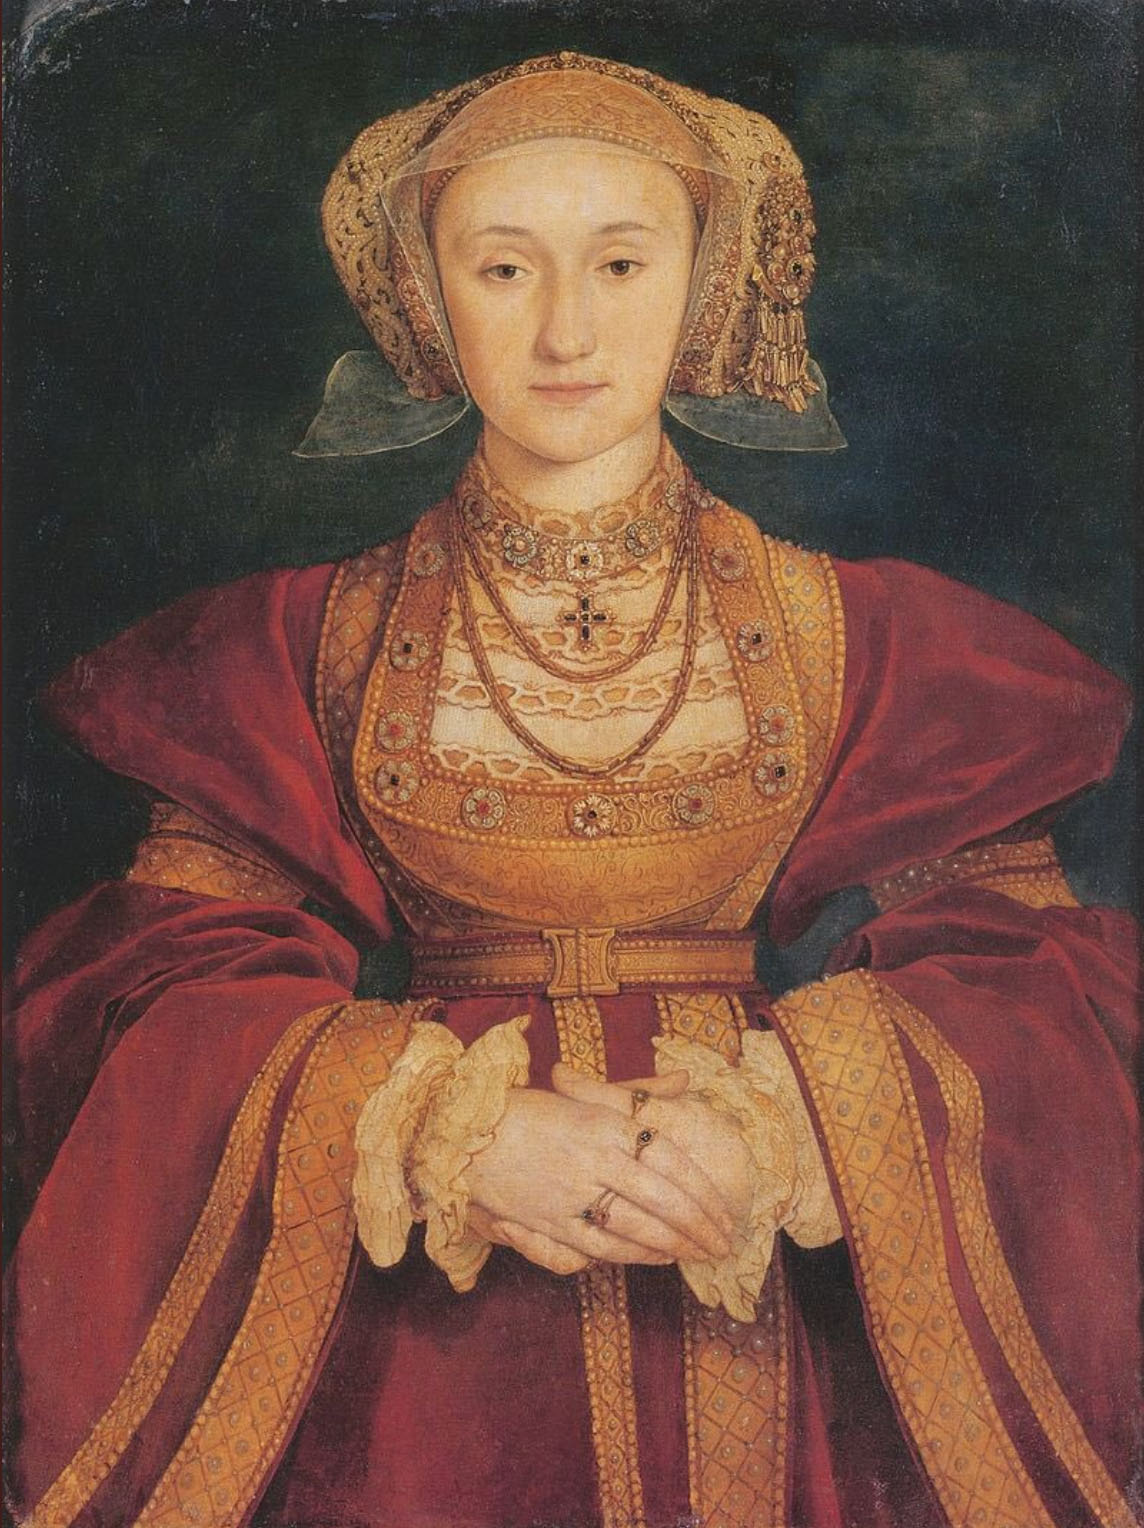 The original Portrait of Anne of Cleves by Hans Holbein the Younger